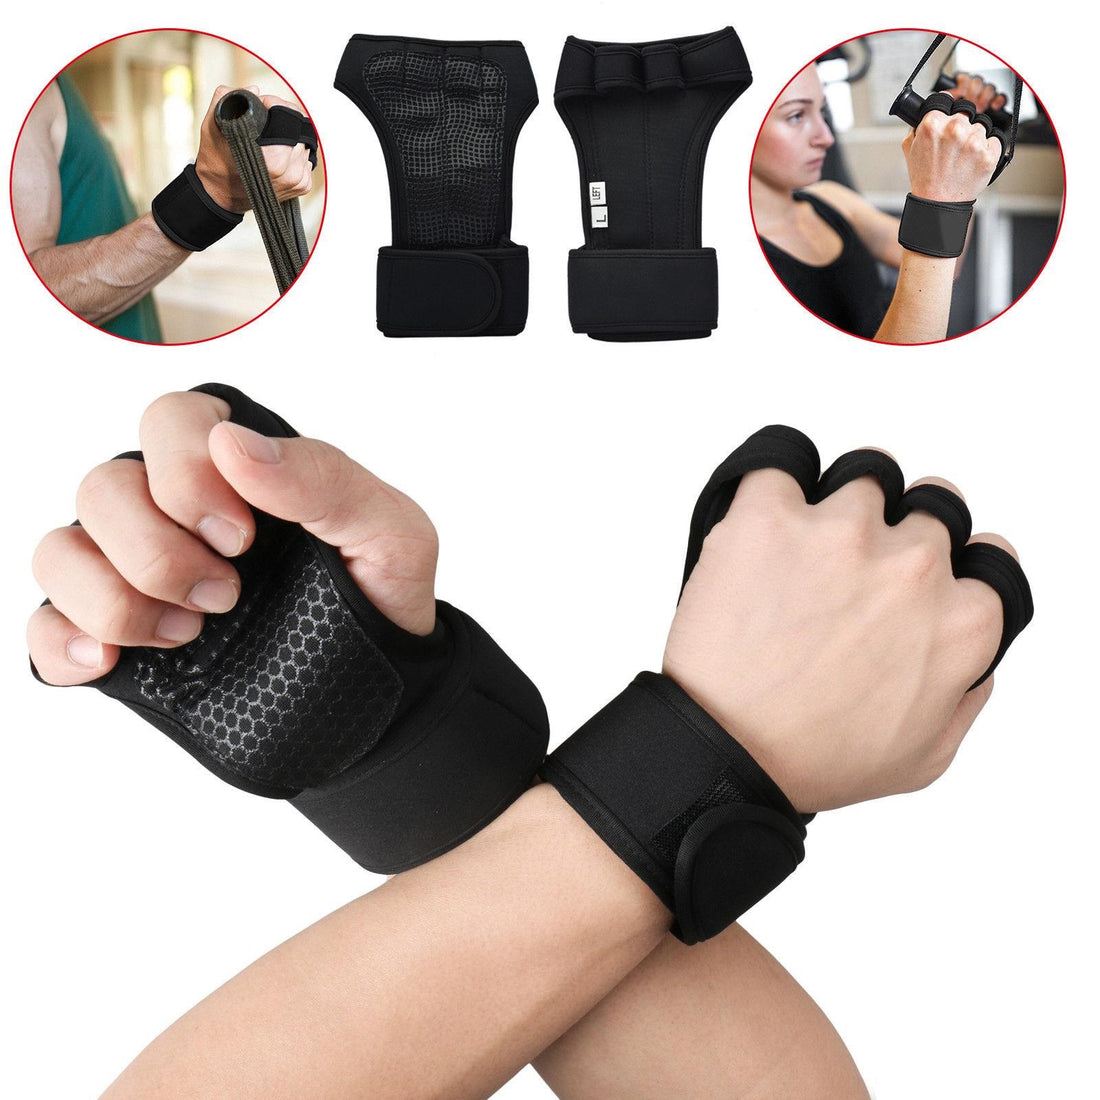 YNR GYM WEIGHT LIFTING GLOVES FITNESS Gel Padded Neoprene Wrist Support Straps